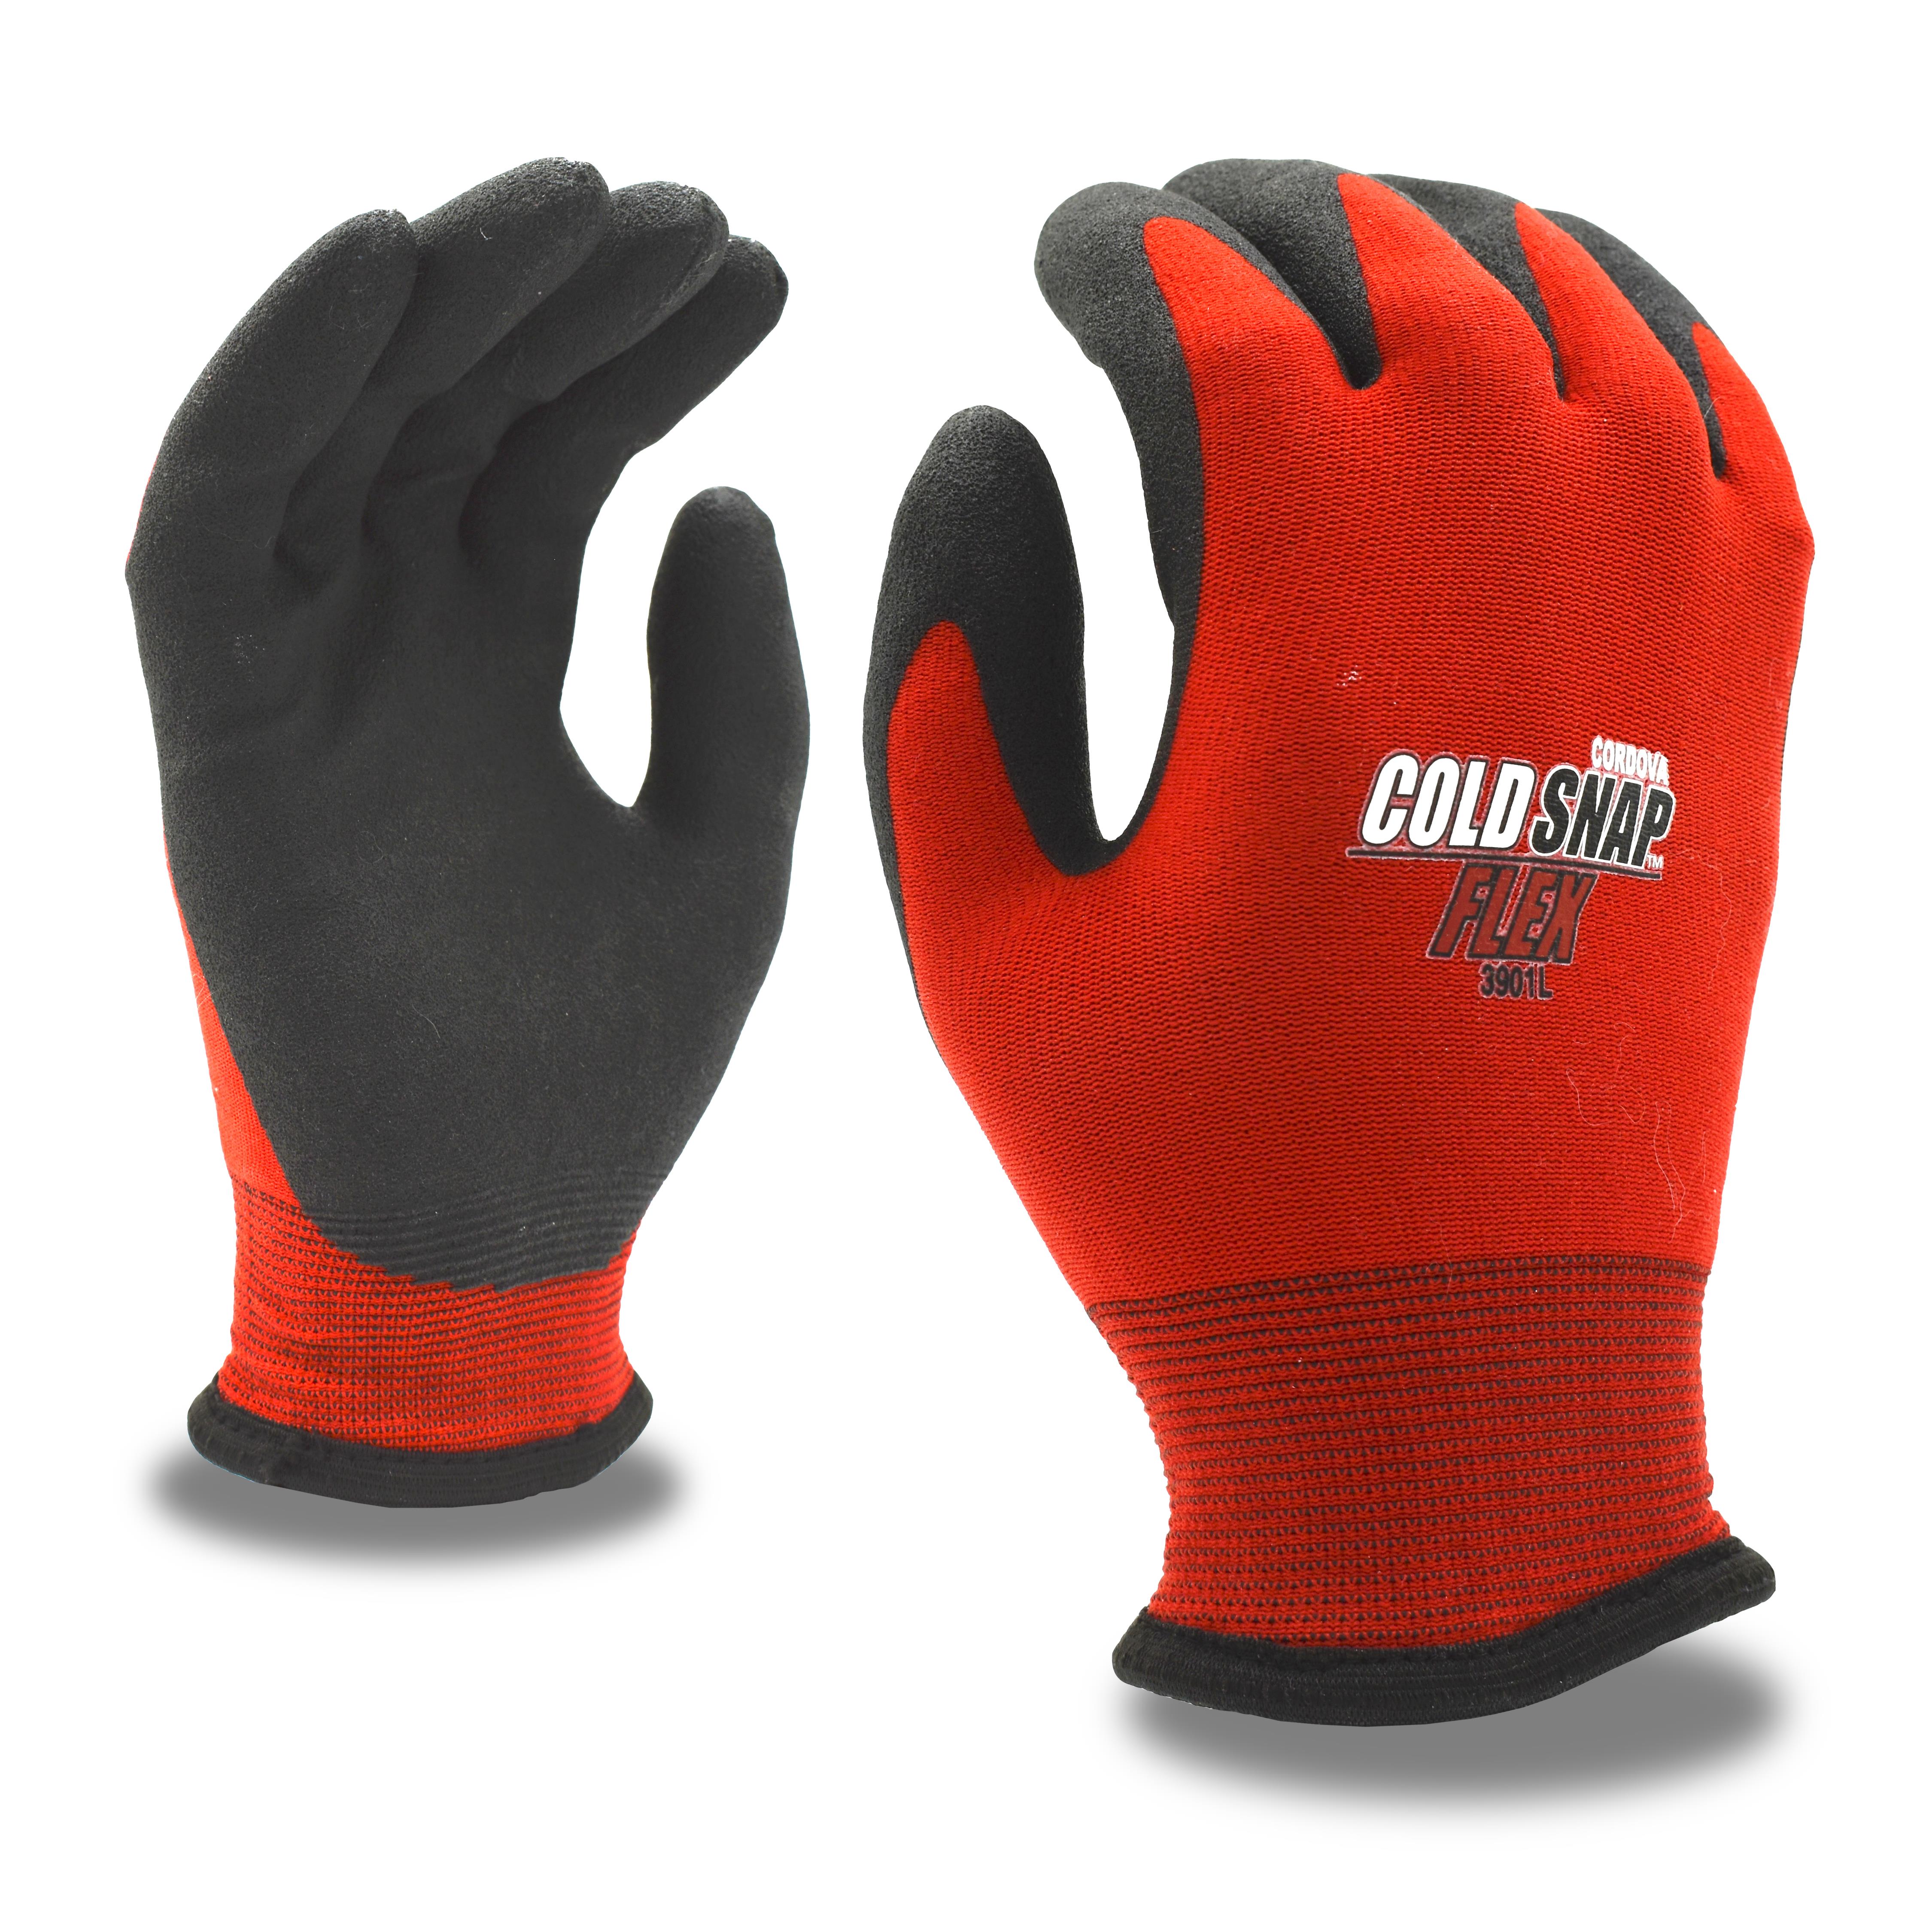 COLD SNAP FLEX FOAM PVC PALM COATED - Insulated Coated Gloves